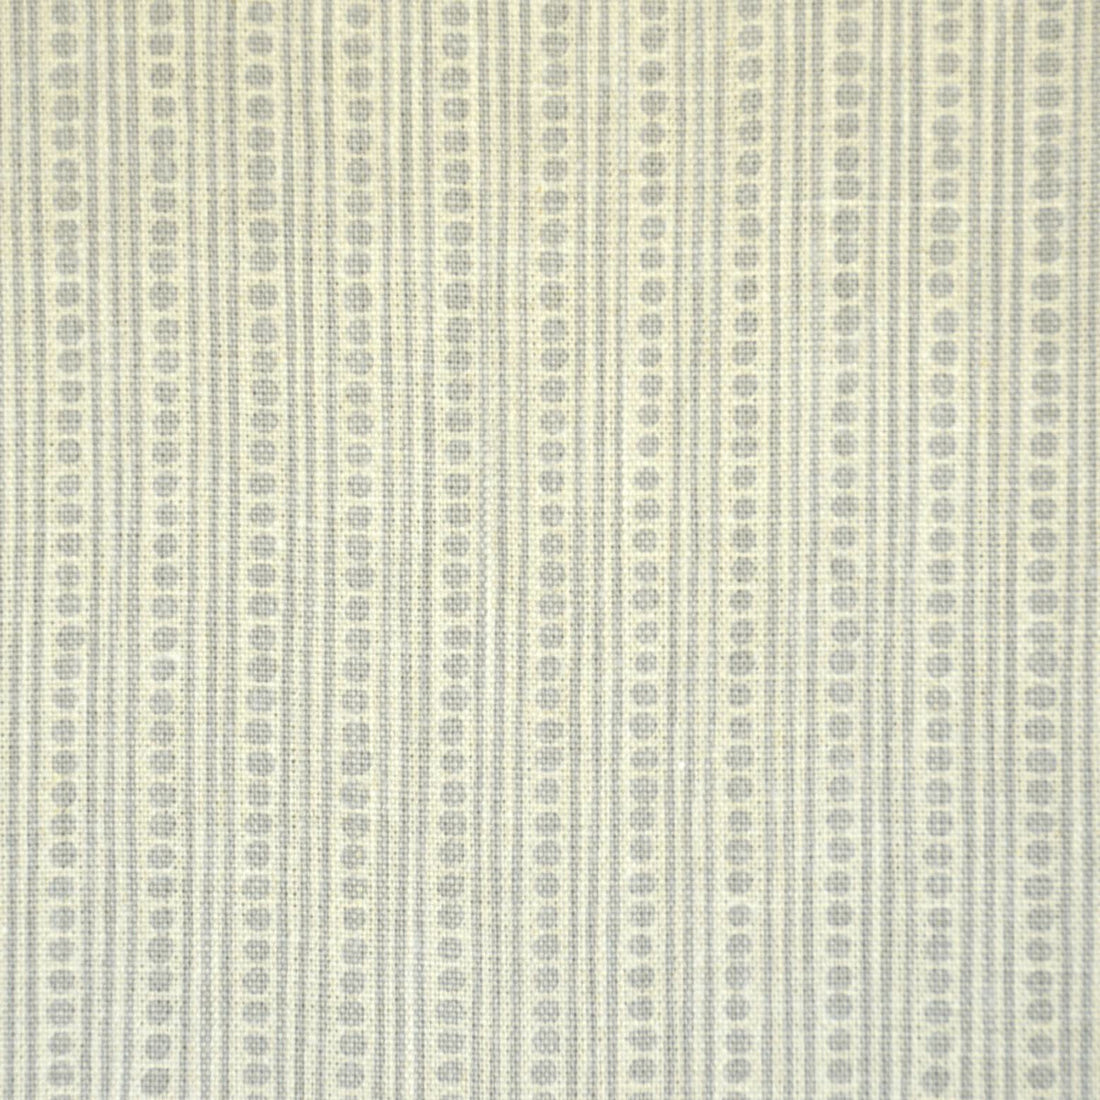 Wicklewood Reverse fabric in light grey color - pattern BFC-3627.11.0 - by Lee Jofa in the Blithfield collection